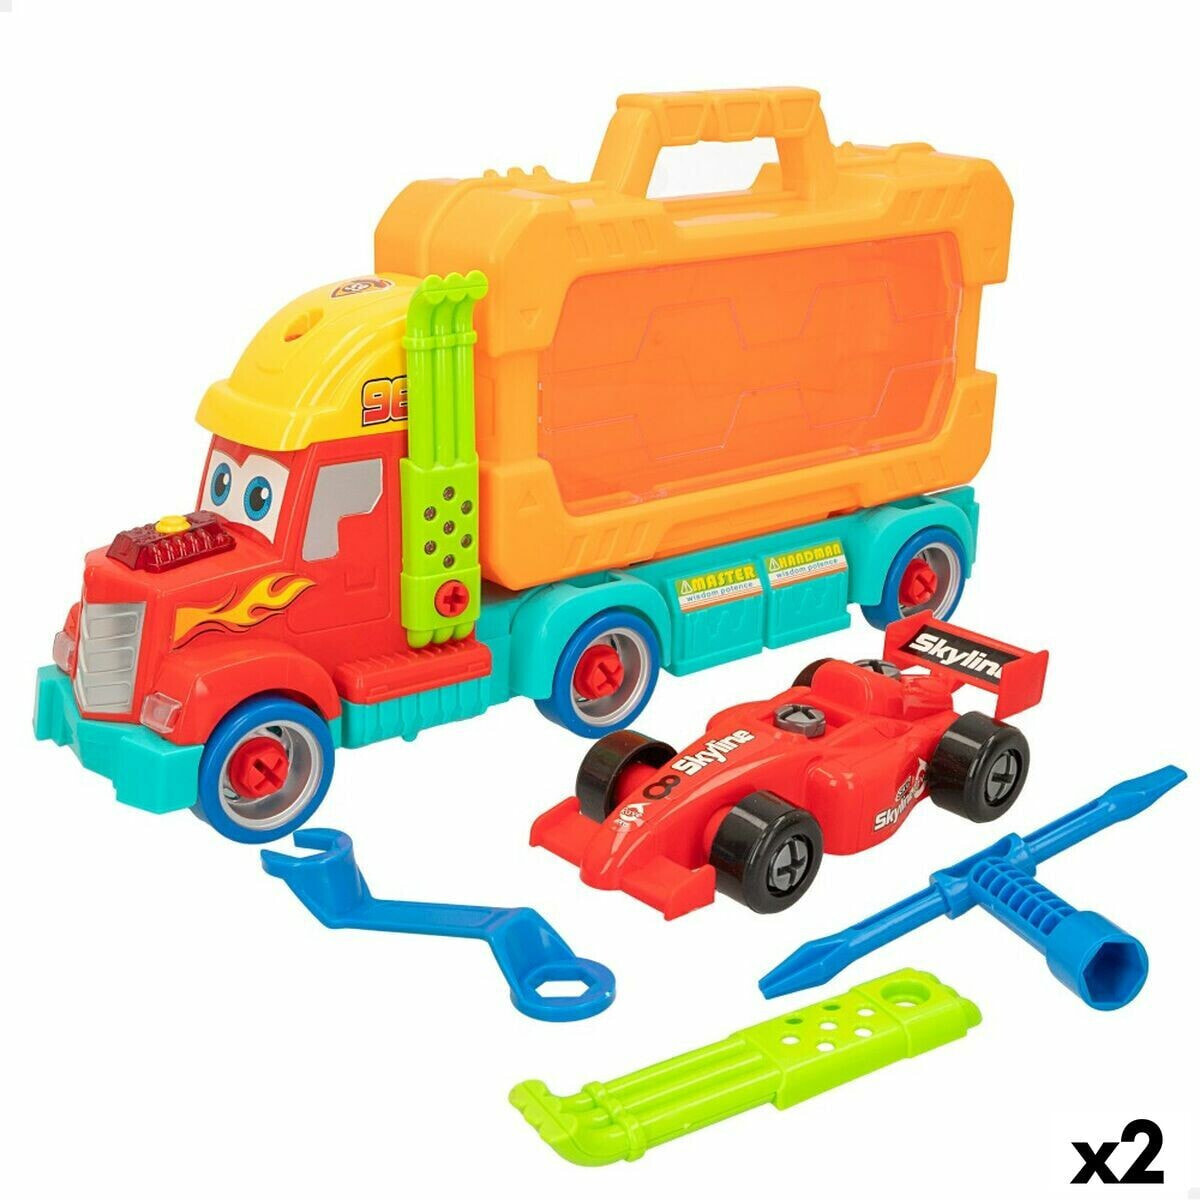 Vehicle Carrier Truck Colorbaby 43 x 23,5 x 10,5 cm (2 Units)